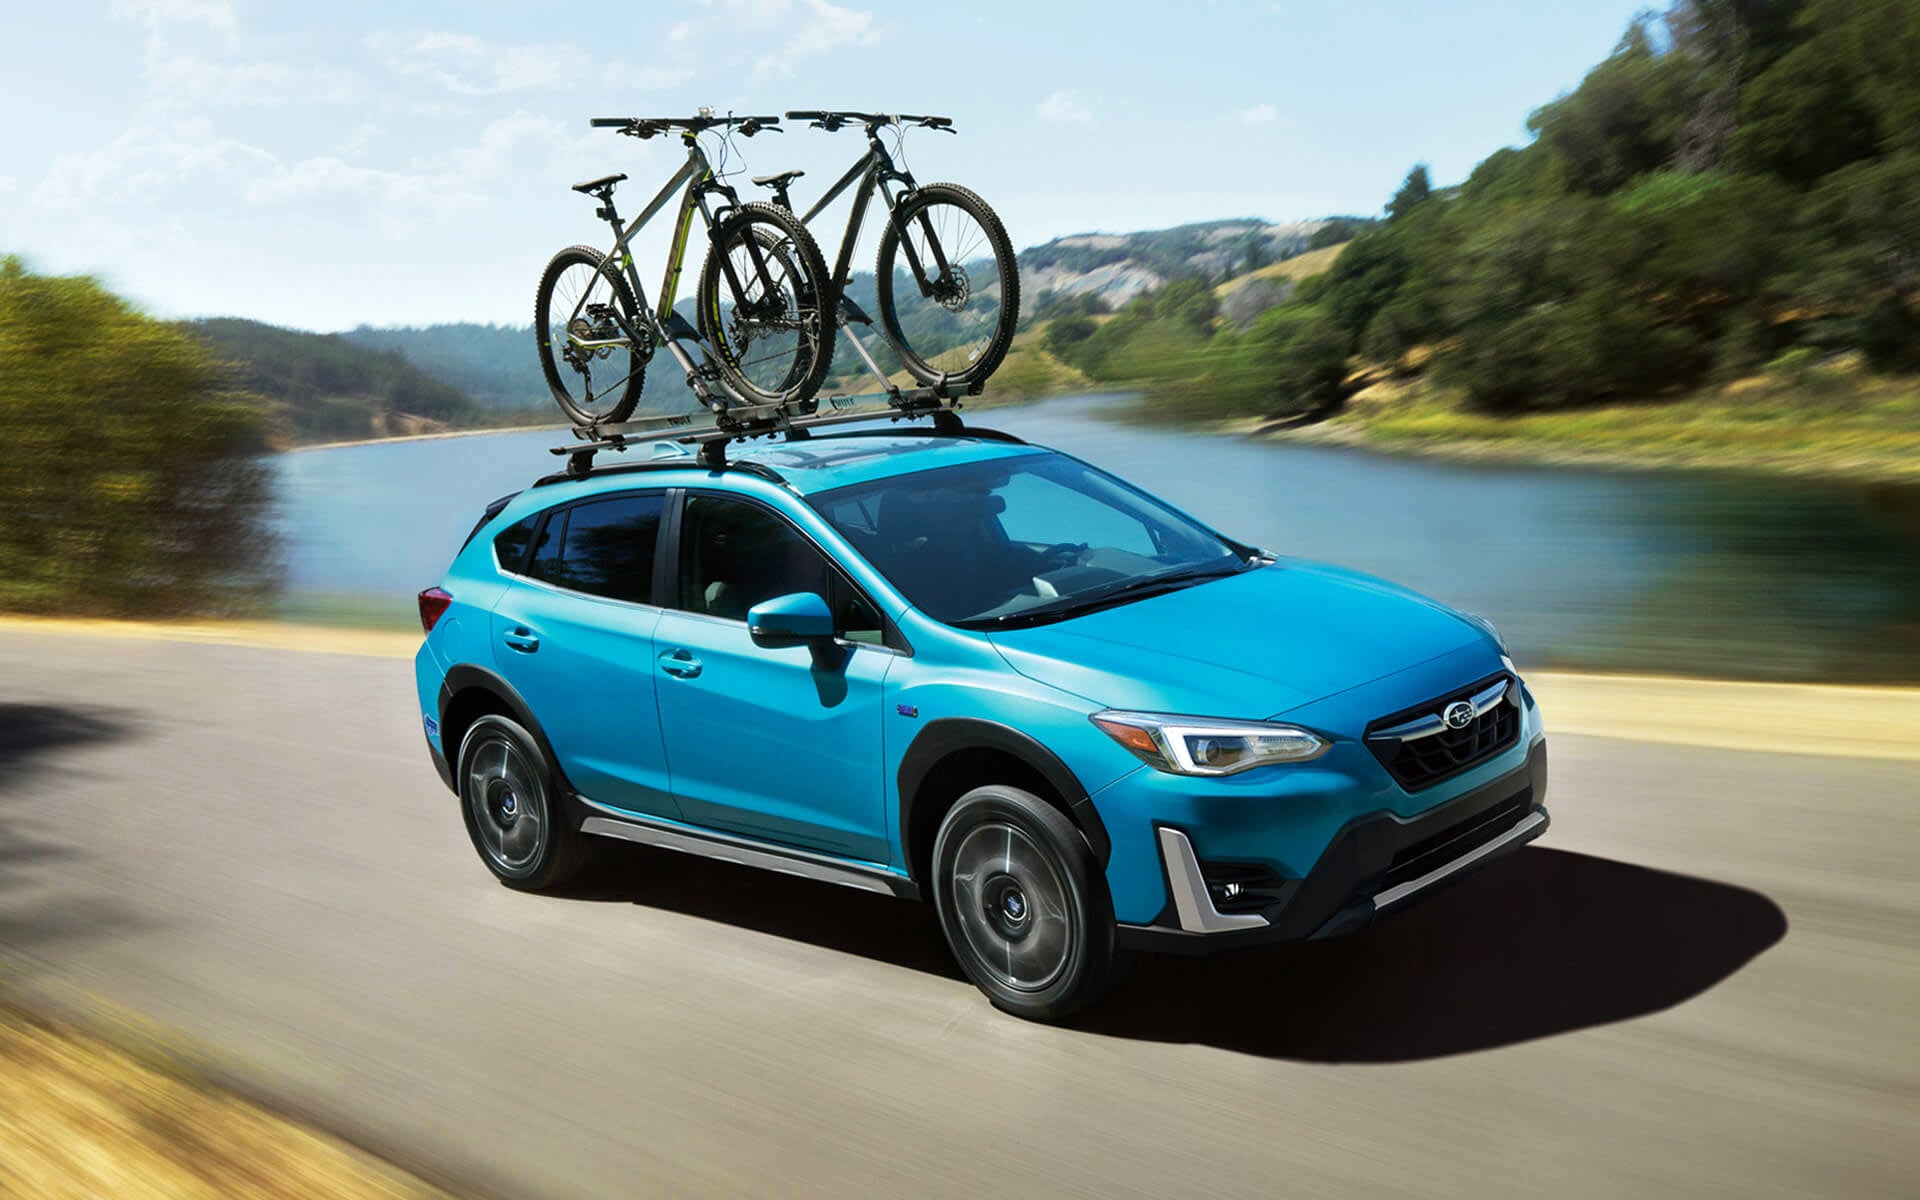 A blue Crosstrek Hybrid with two bicycles on its roof rack driving beside a river | Subaru Superstore of Surprise in Surprise AZ